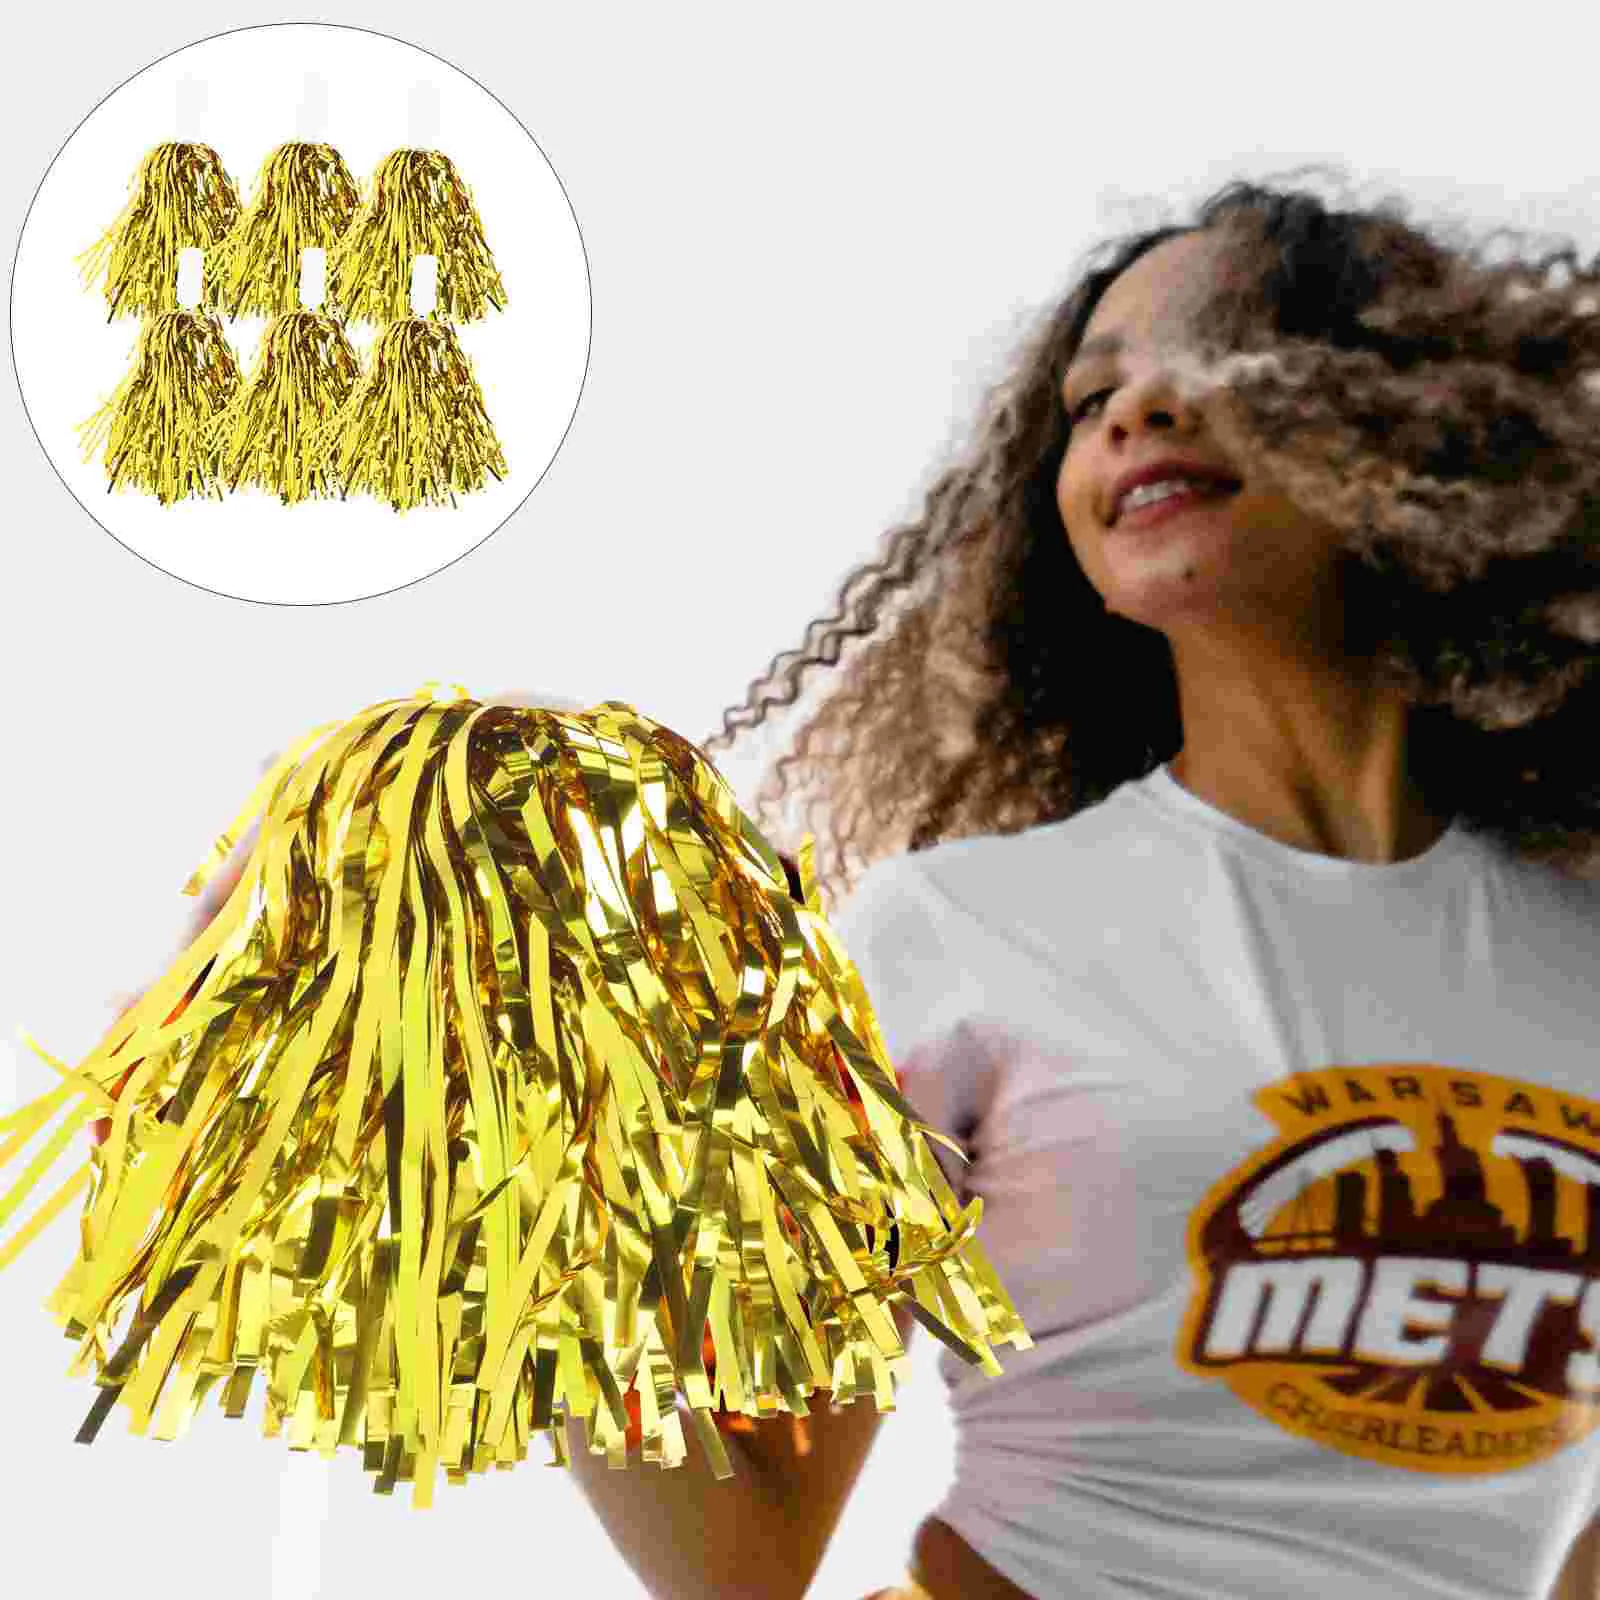 6Pcs Handheld Cheering Props Gymnastics Cheer Pompom Props Sports Meeting Supply 3pcs handheld pompoms cheering props gymnastics cheer pompom props for sports events